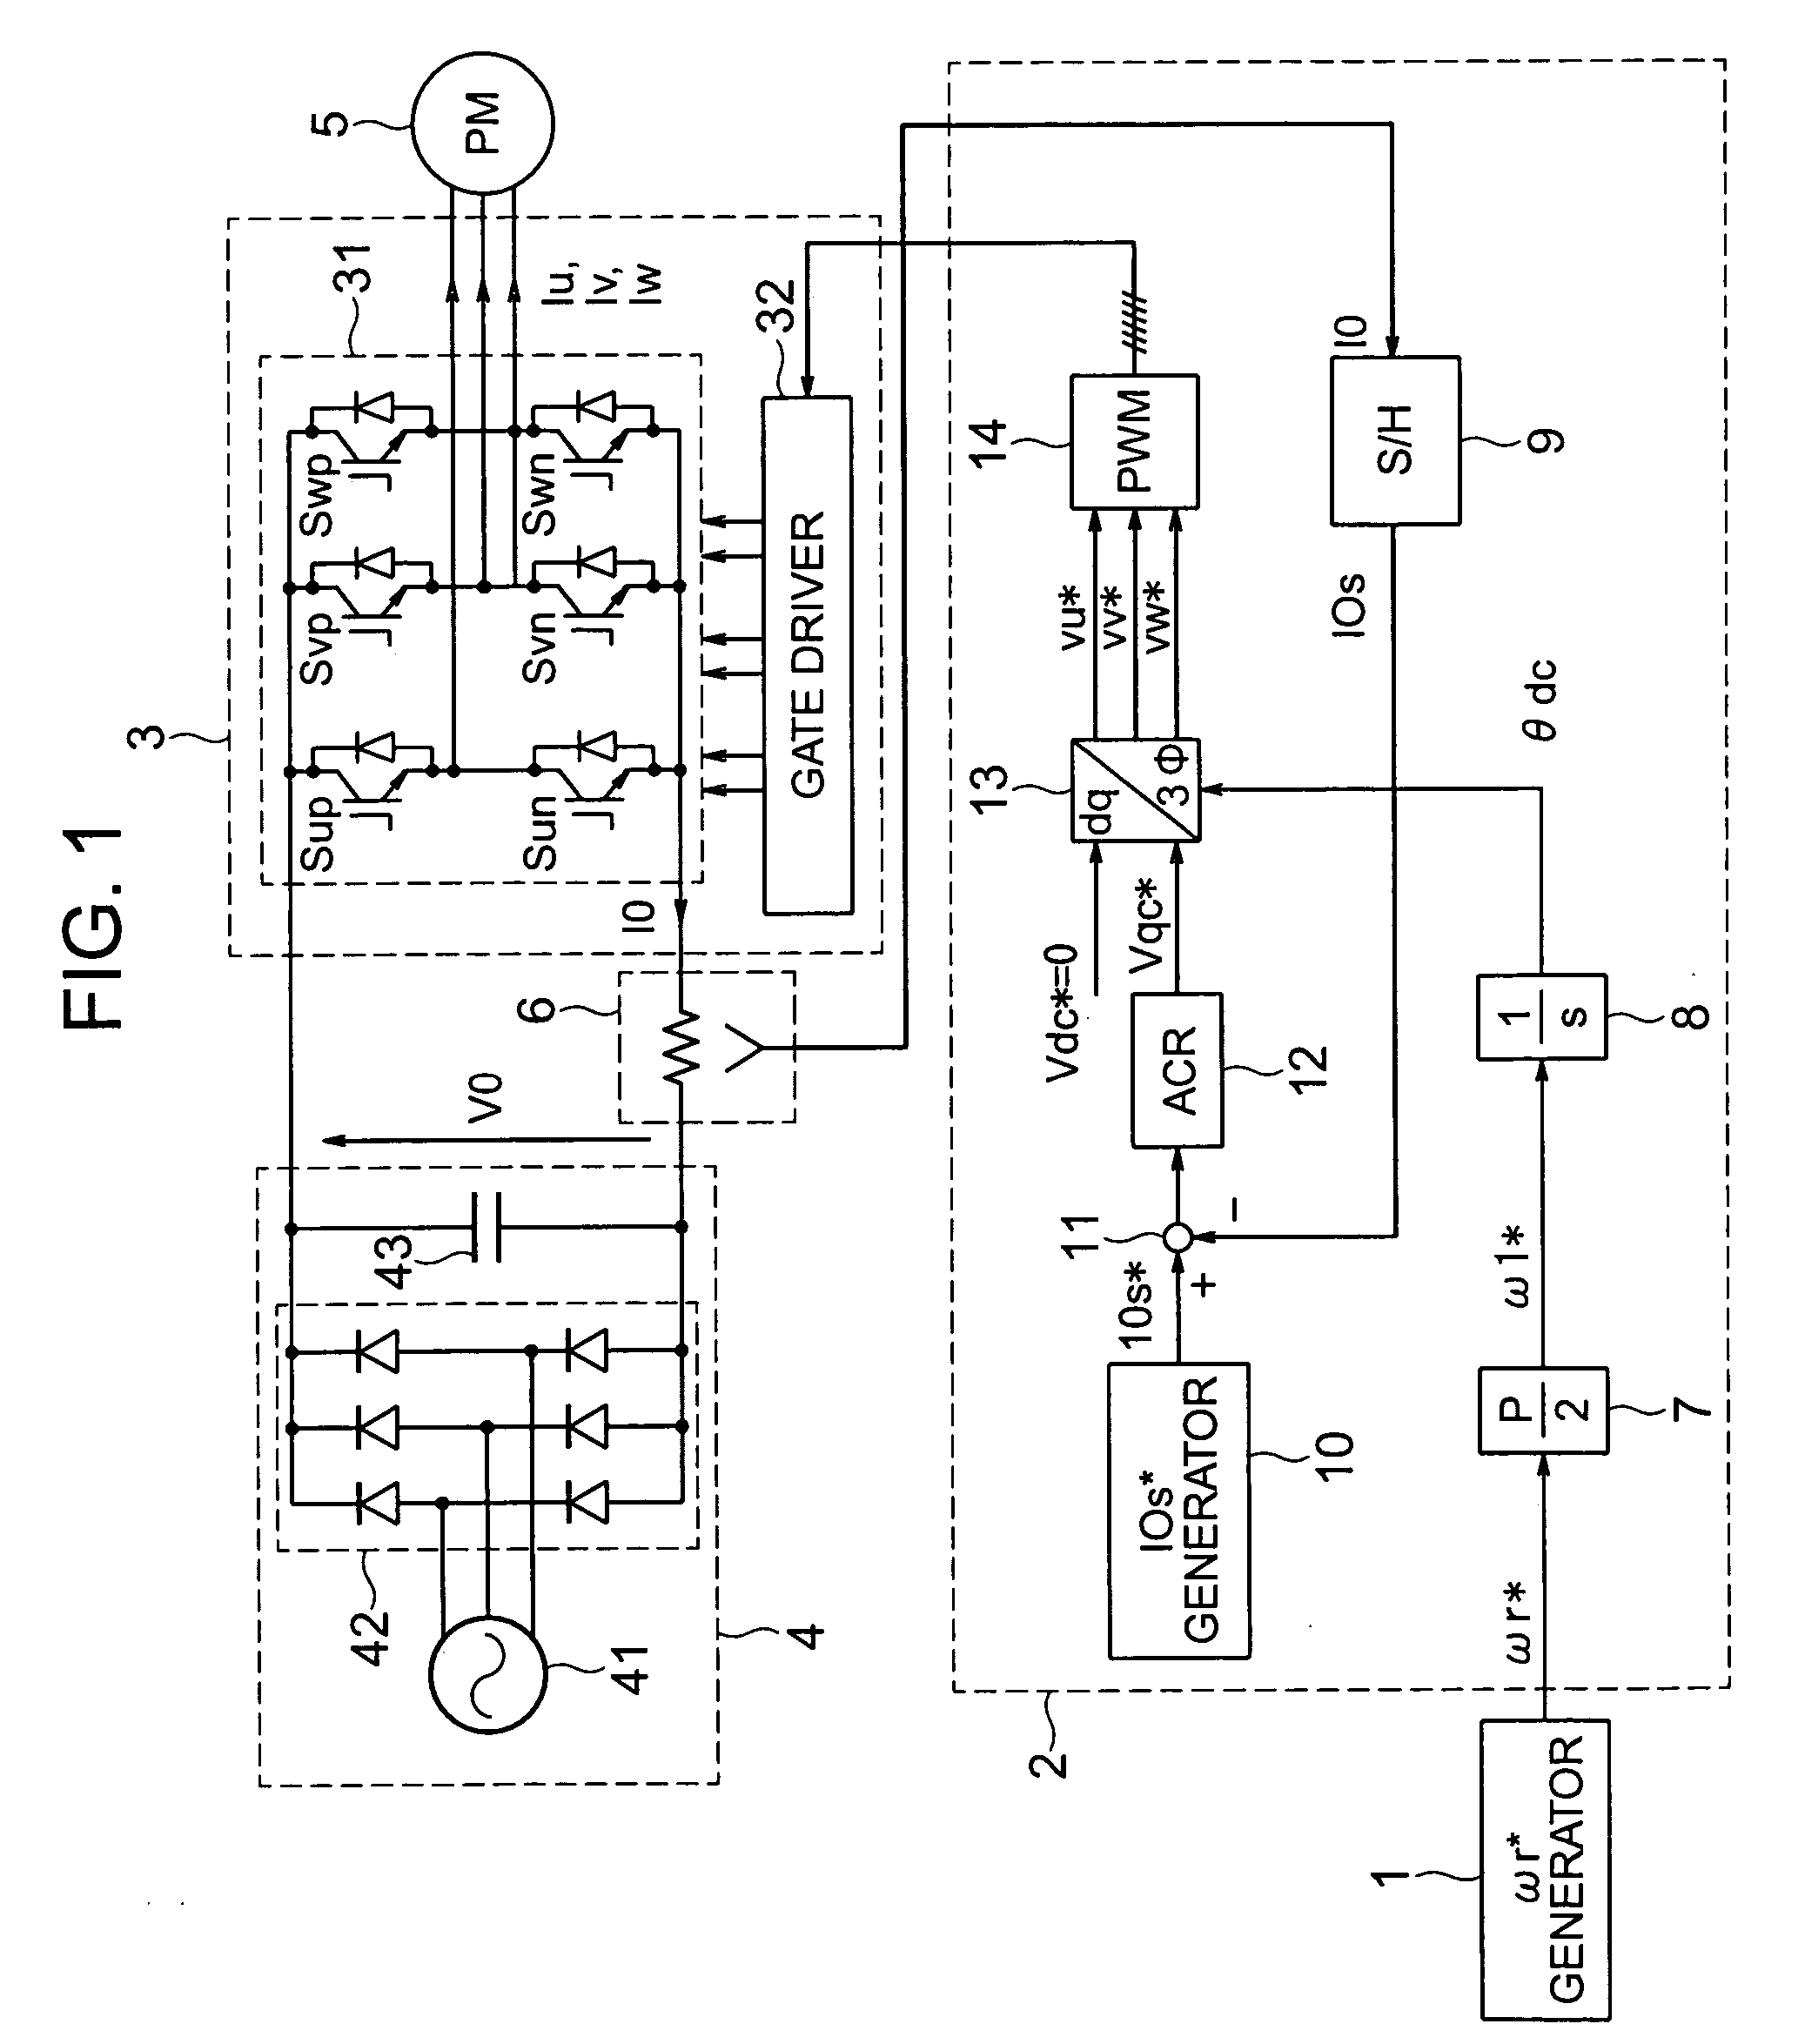 Motor drive system for AC motors